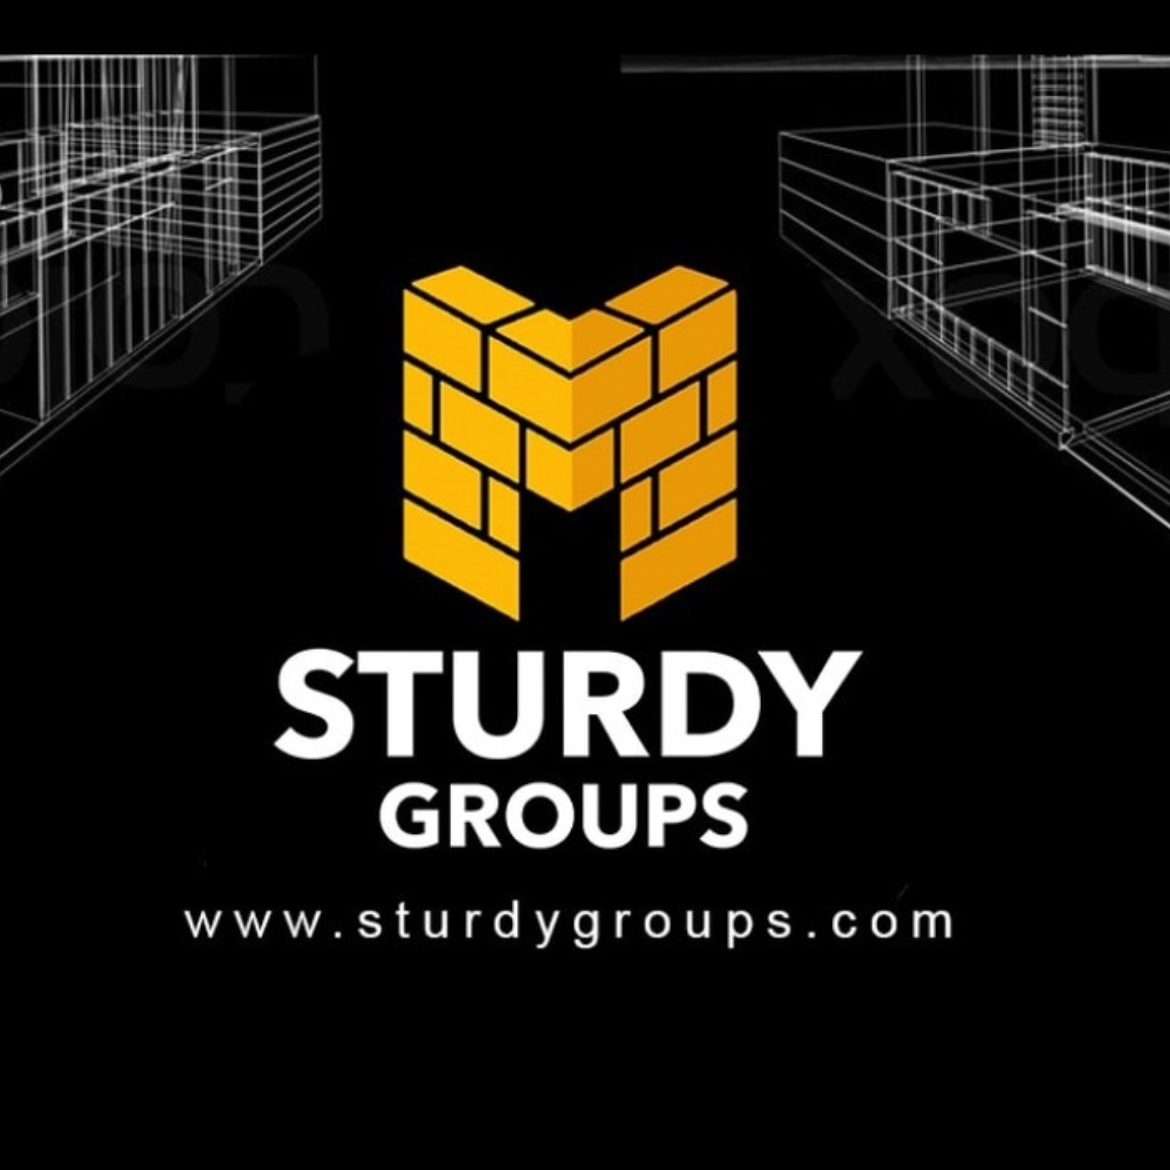 STURDY GROUPS - CONSTRUCTIONS AND INTERIORS - Logo